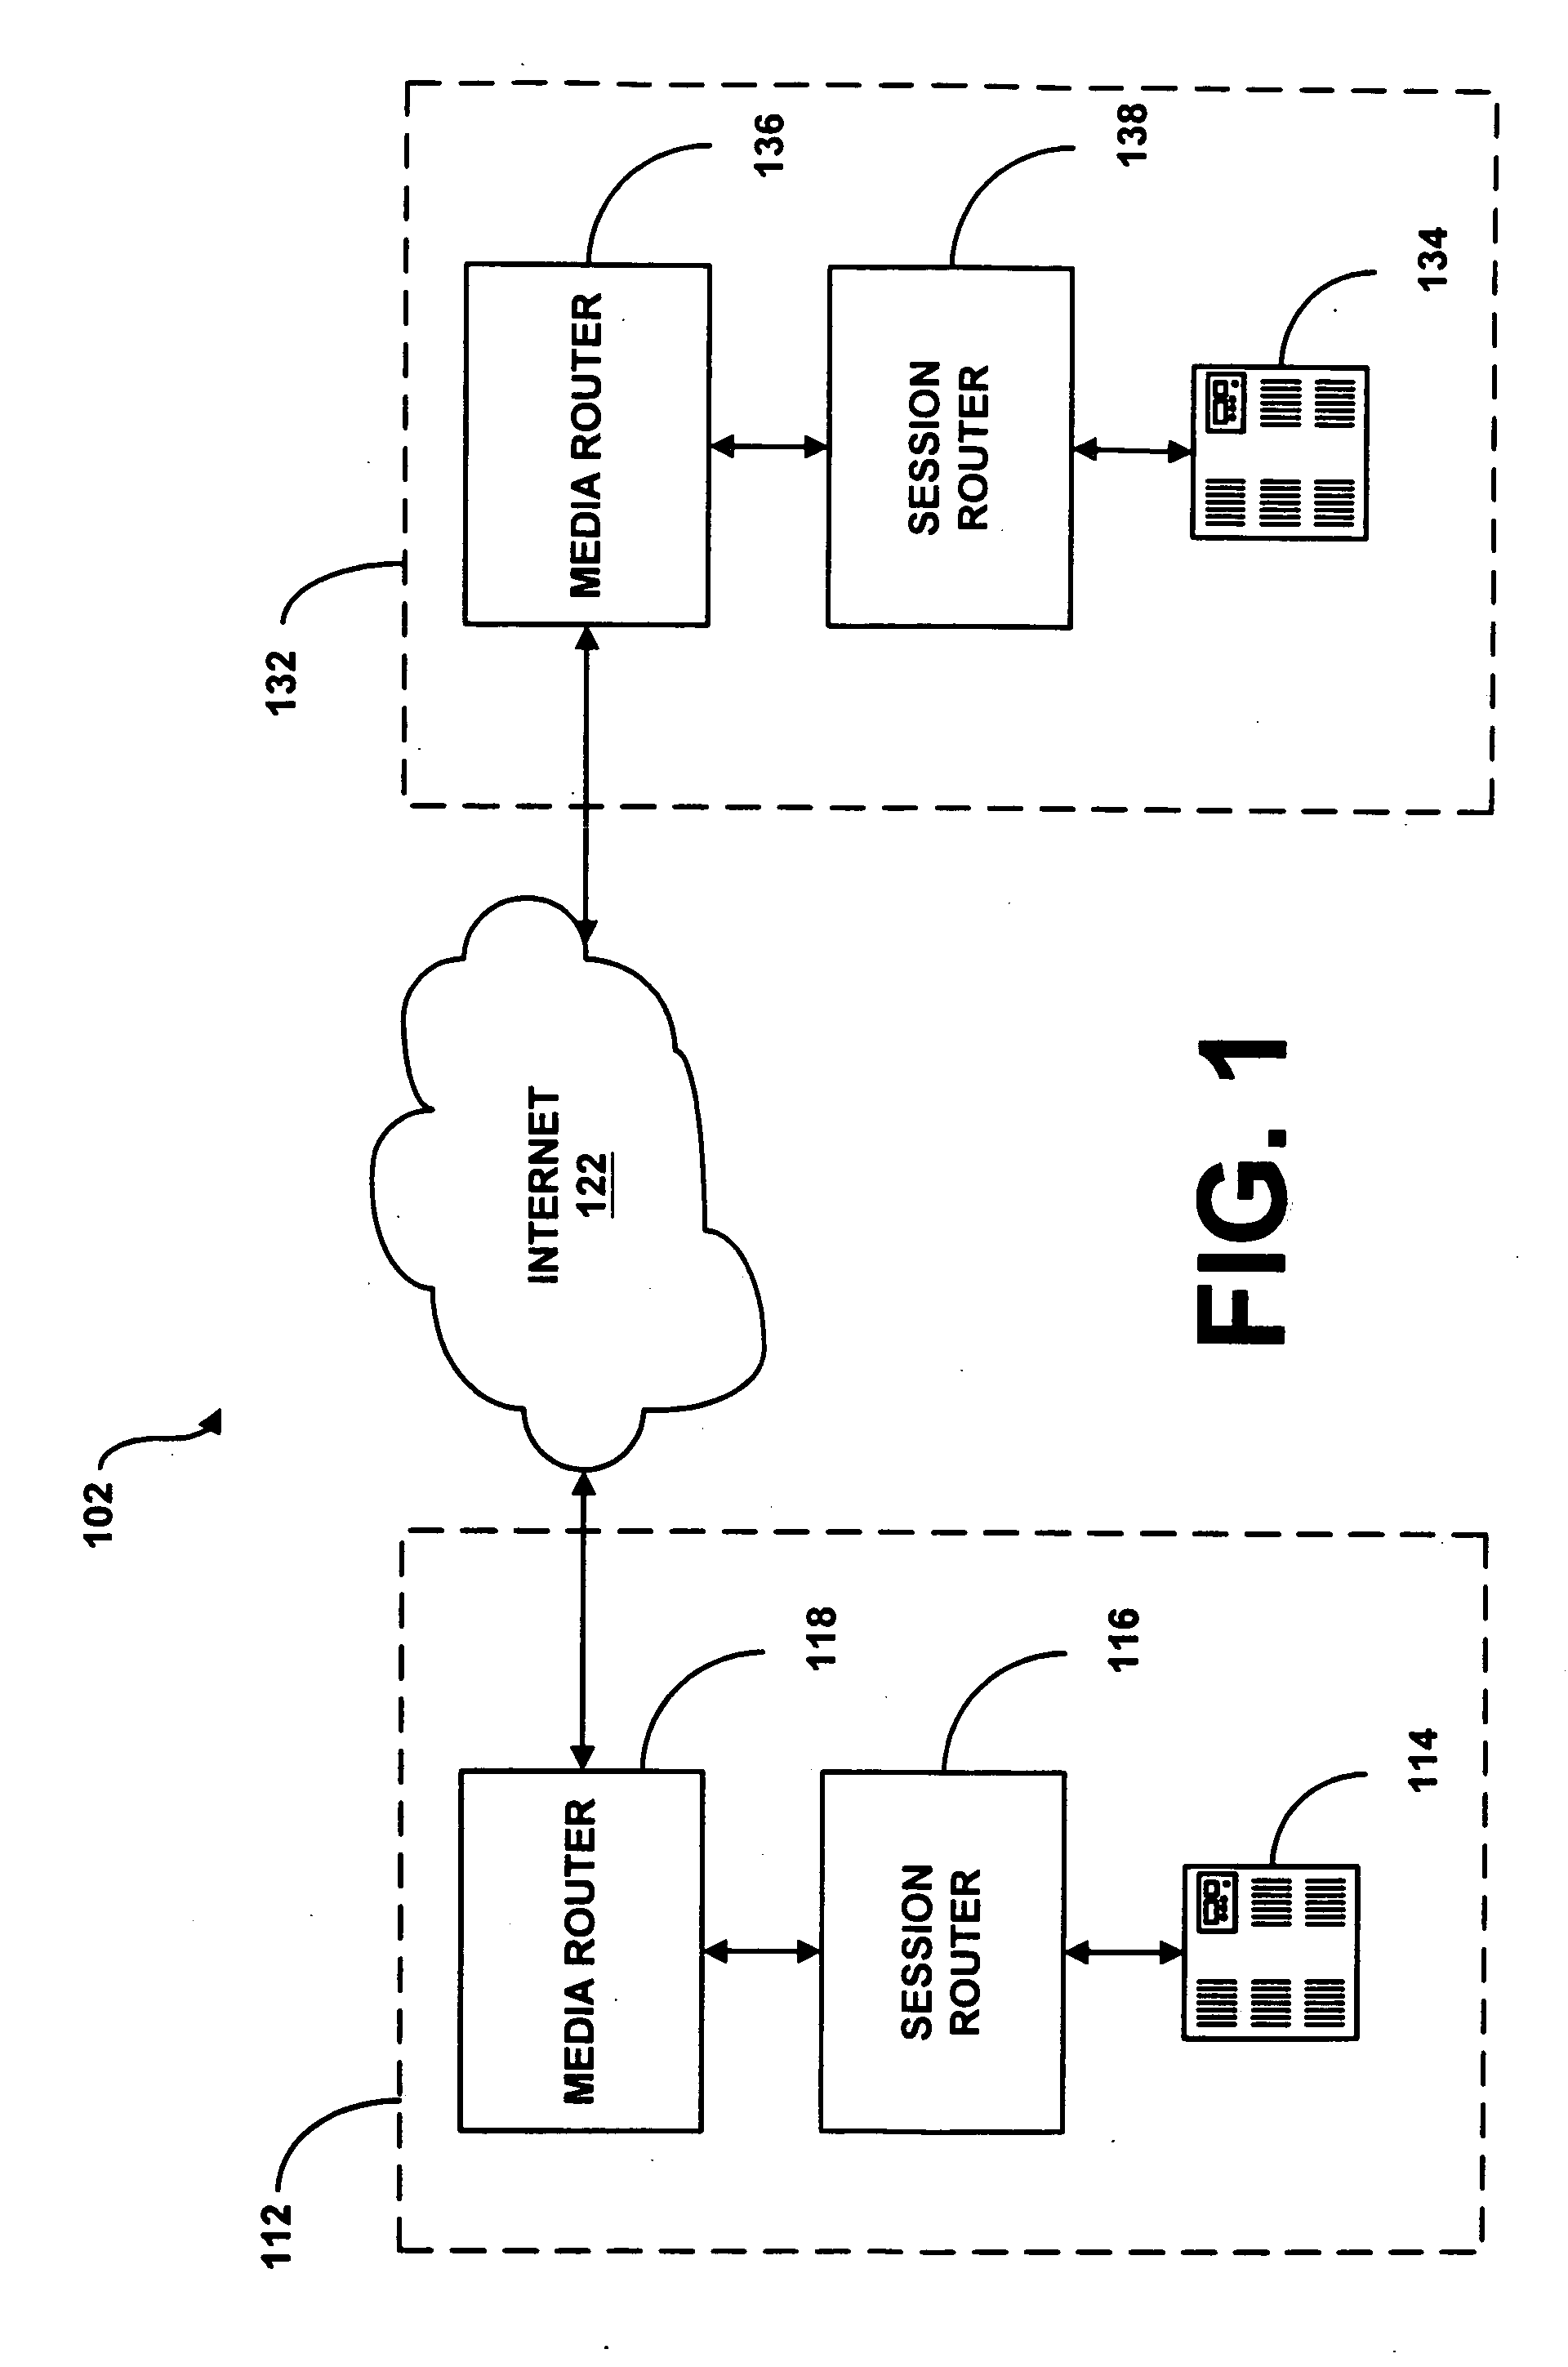 System and method for providing rapid rerouting of real-time multi-media flows